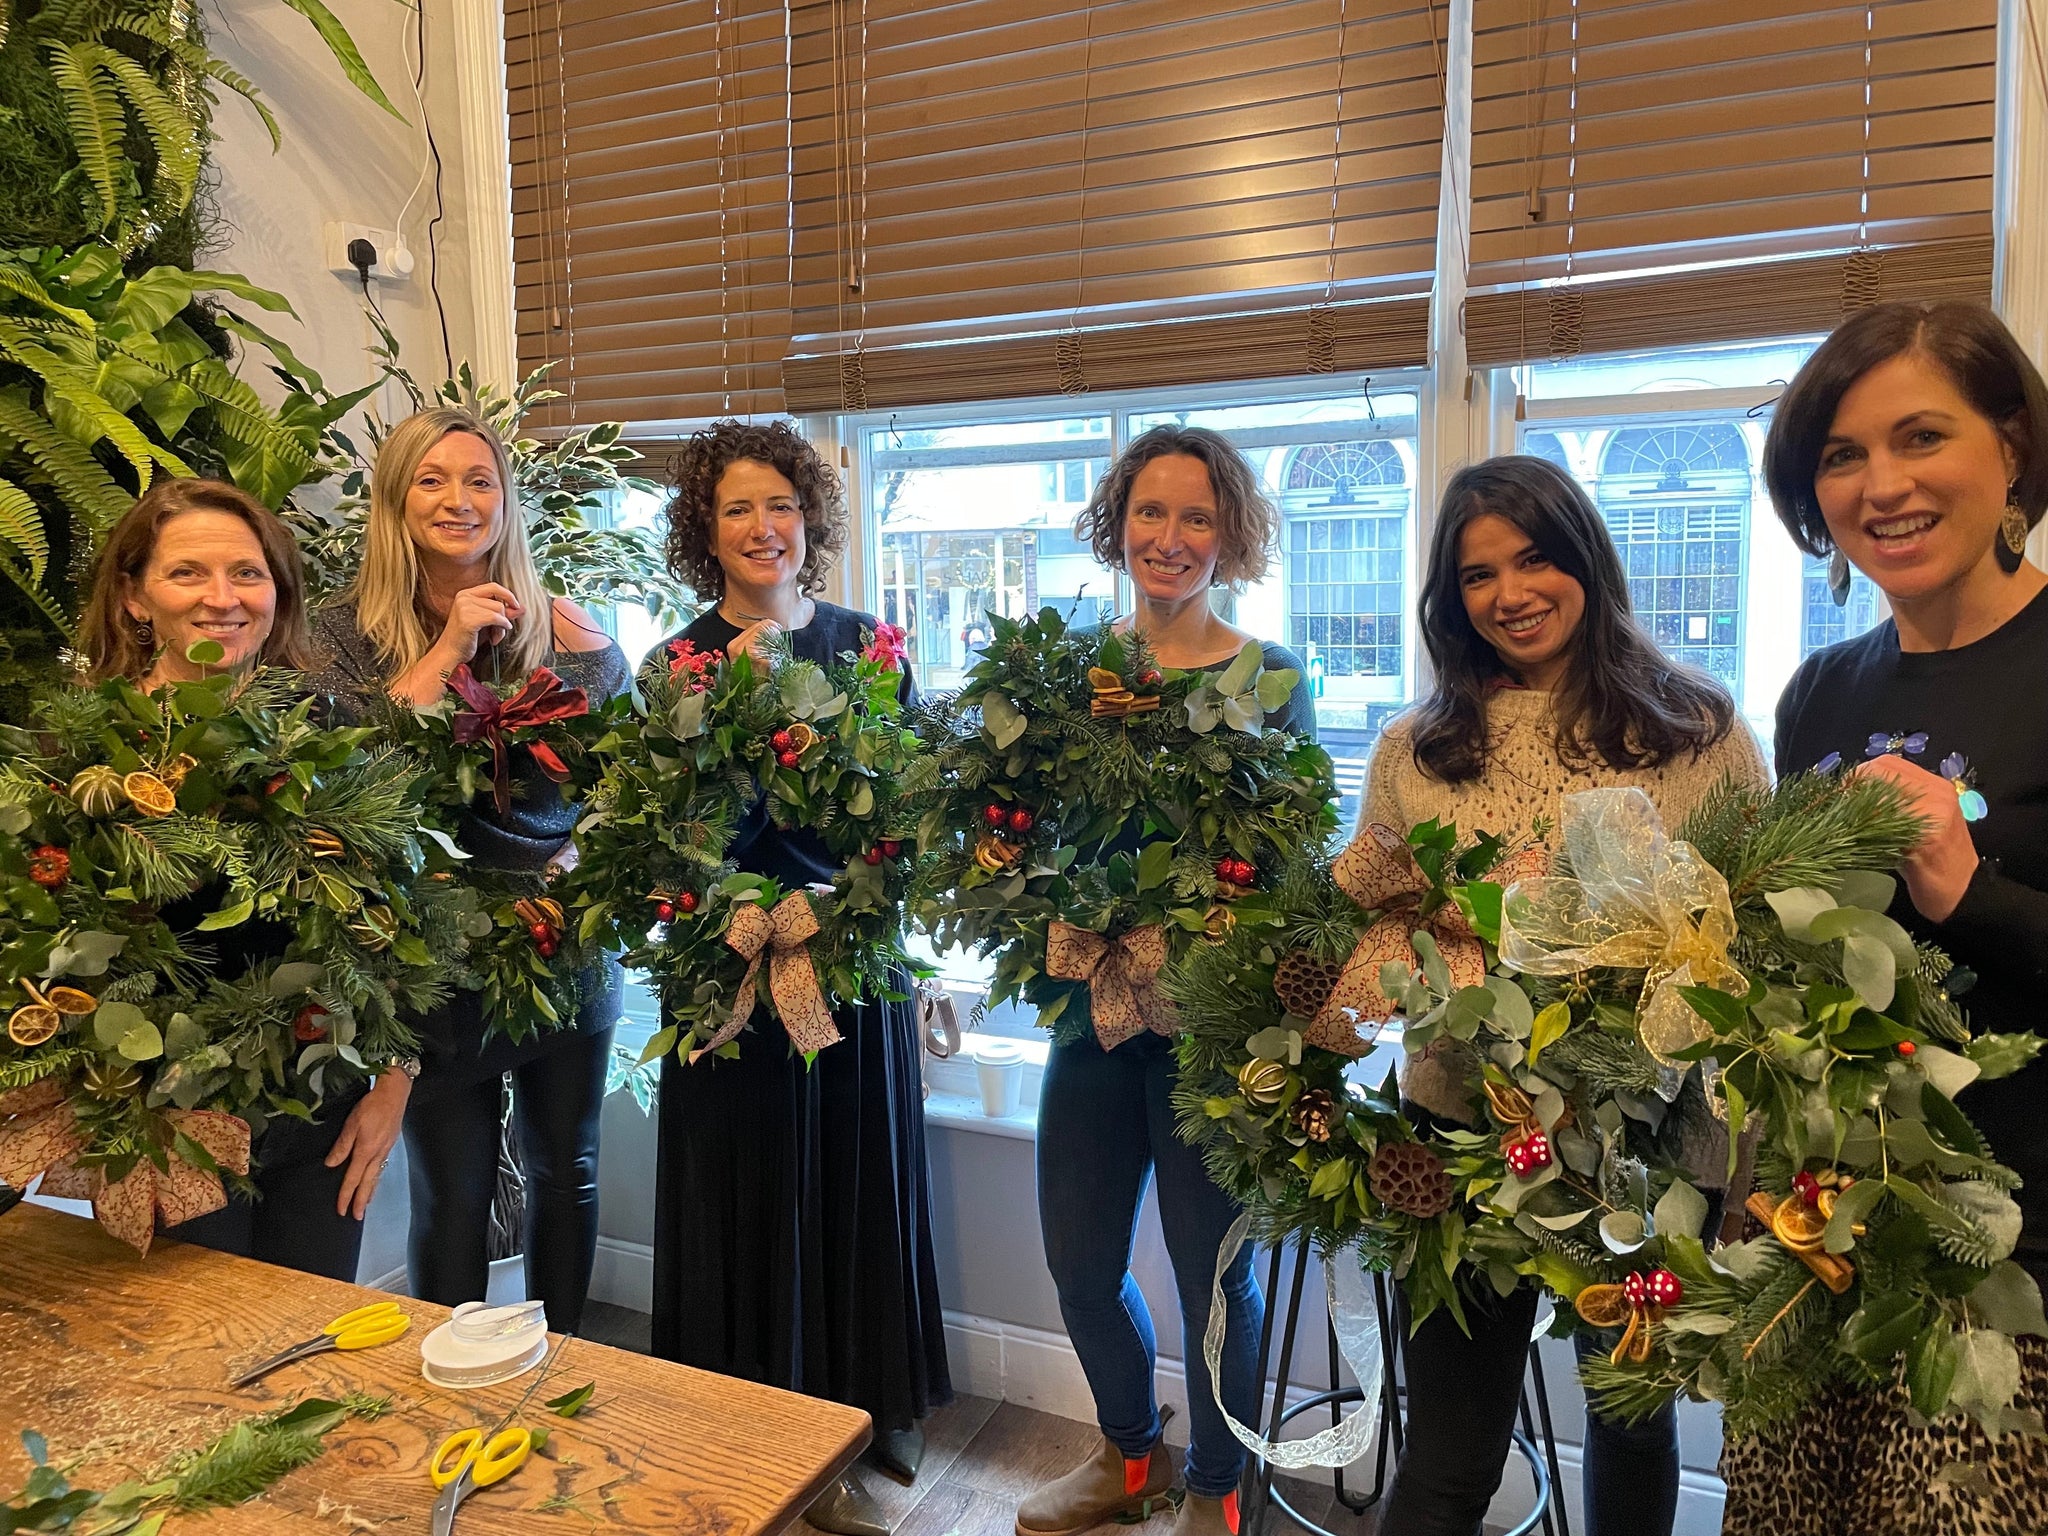 Christmas Wreath Workshop – Wednesday 22nd November, Starting @ 11am (£75 per person) 2.5 hours